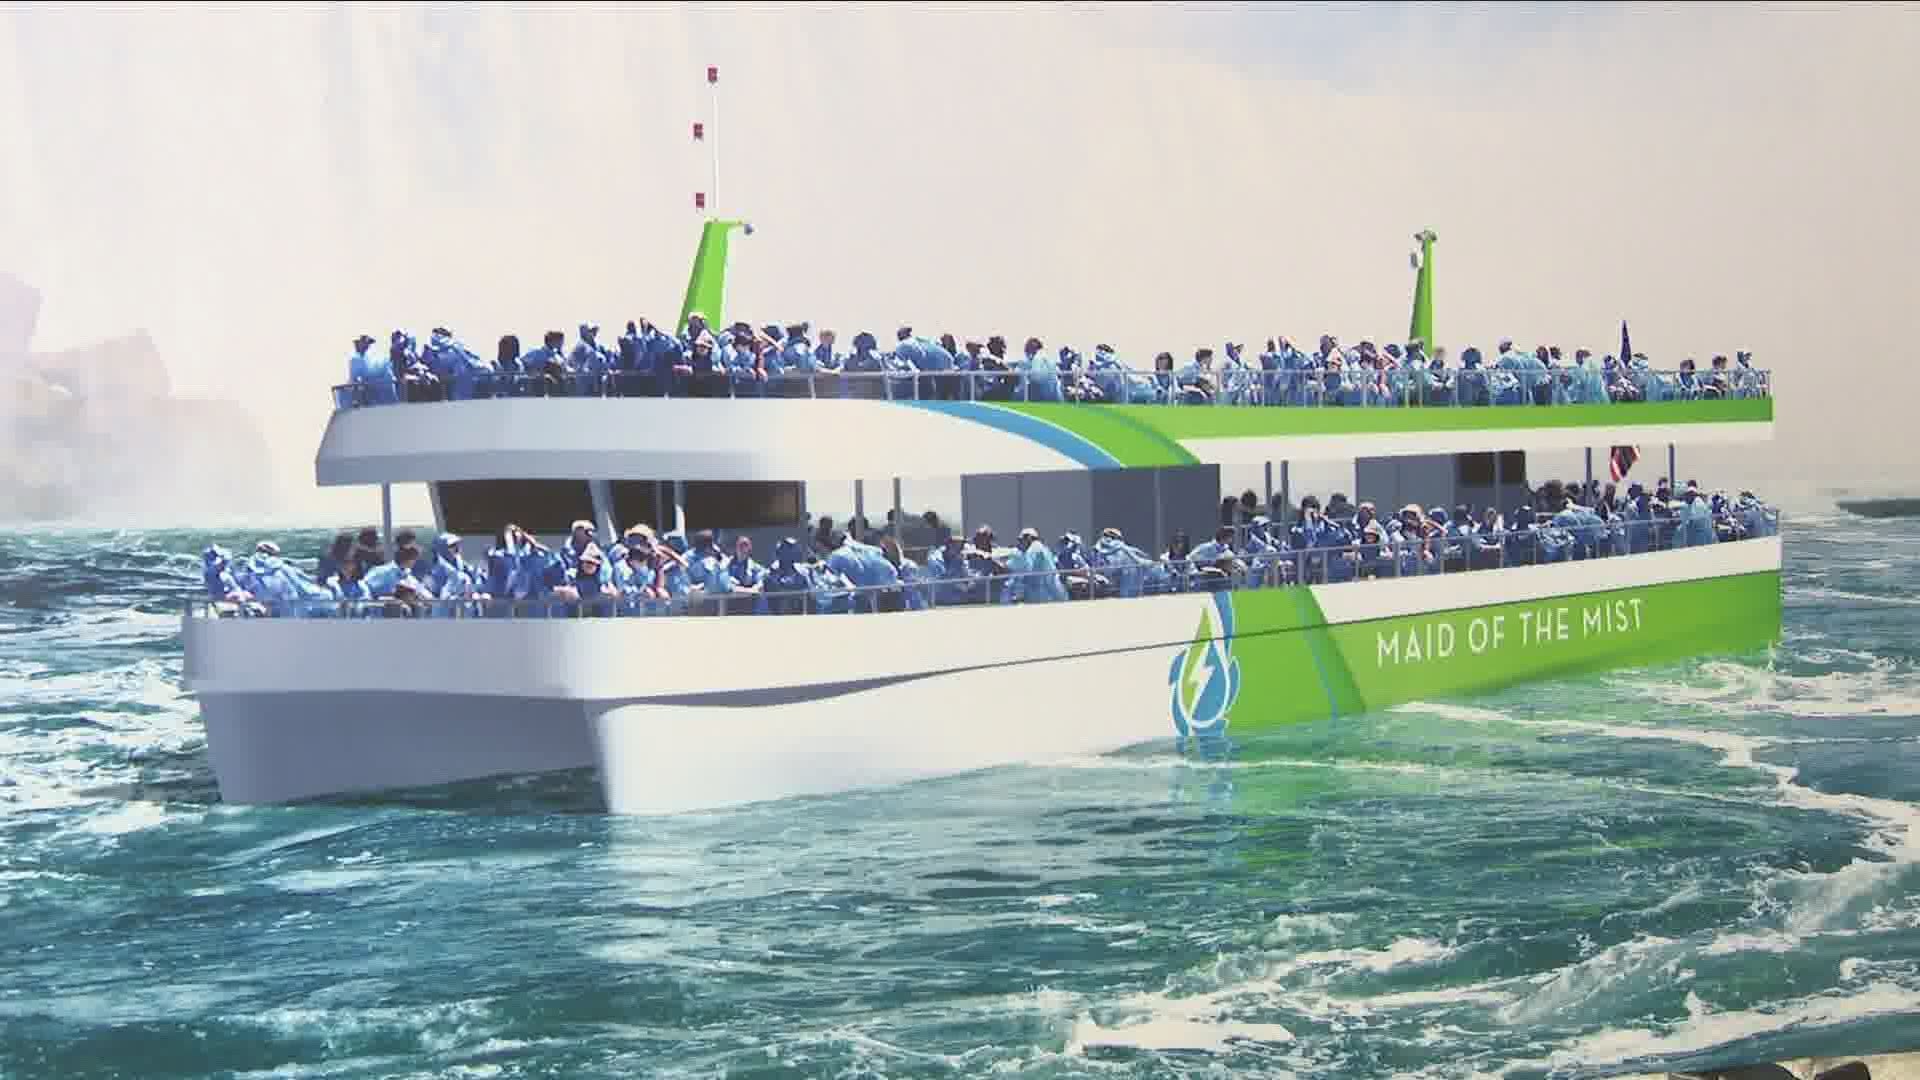 Maid of the Mist launching zero-emission, electric boats